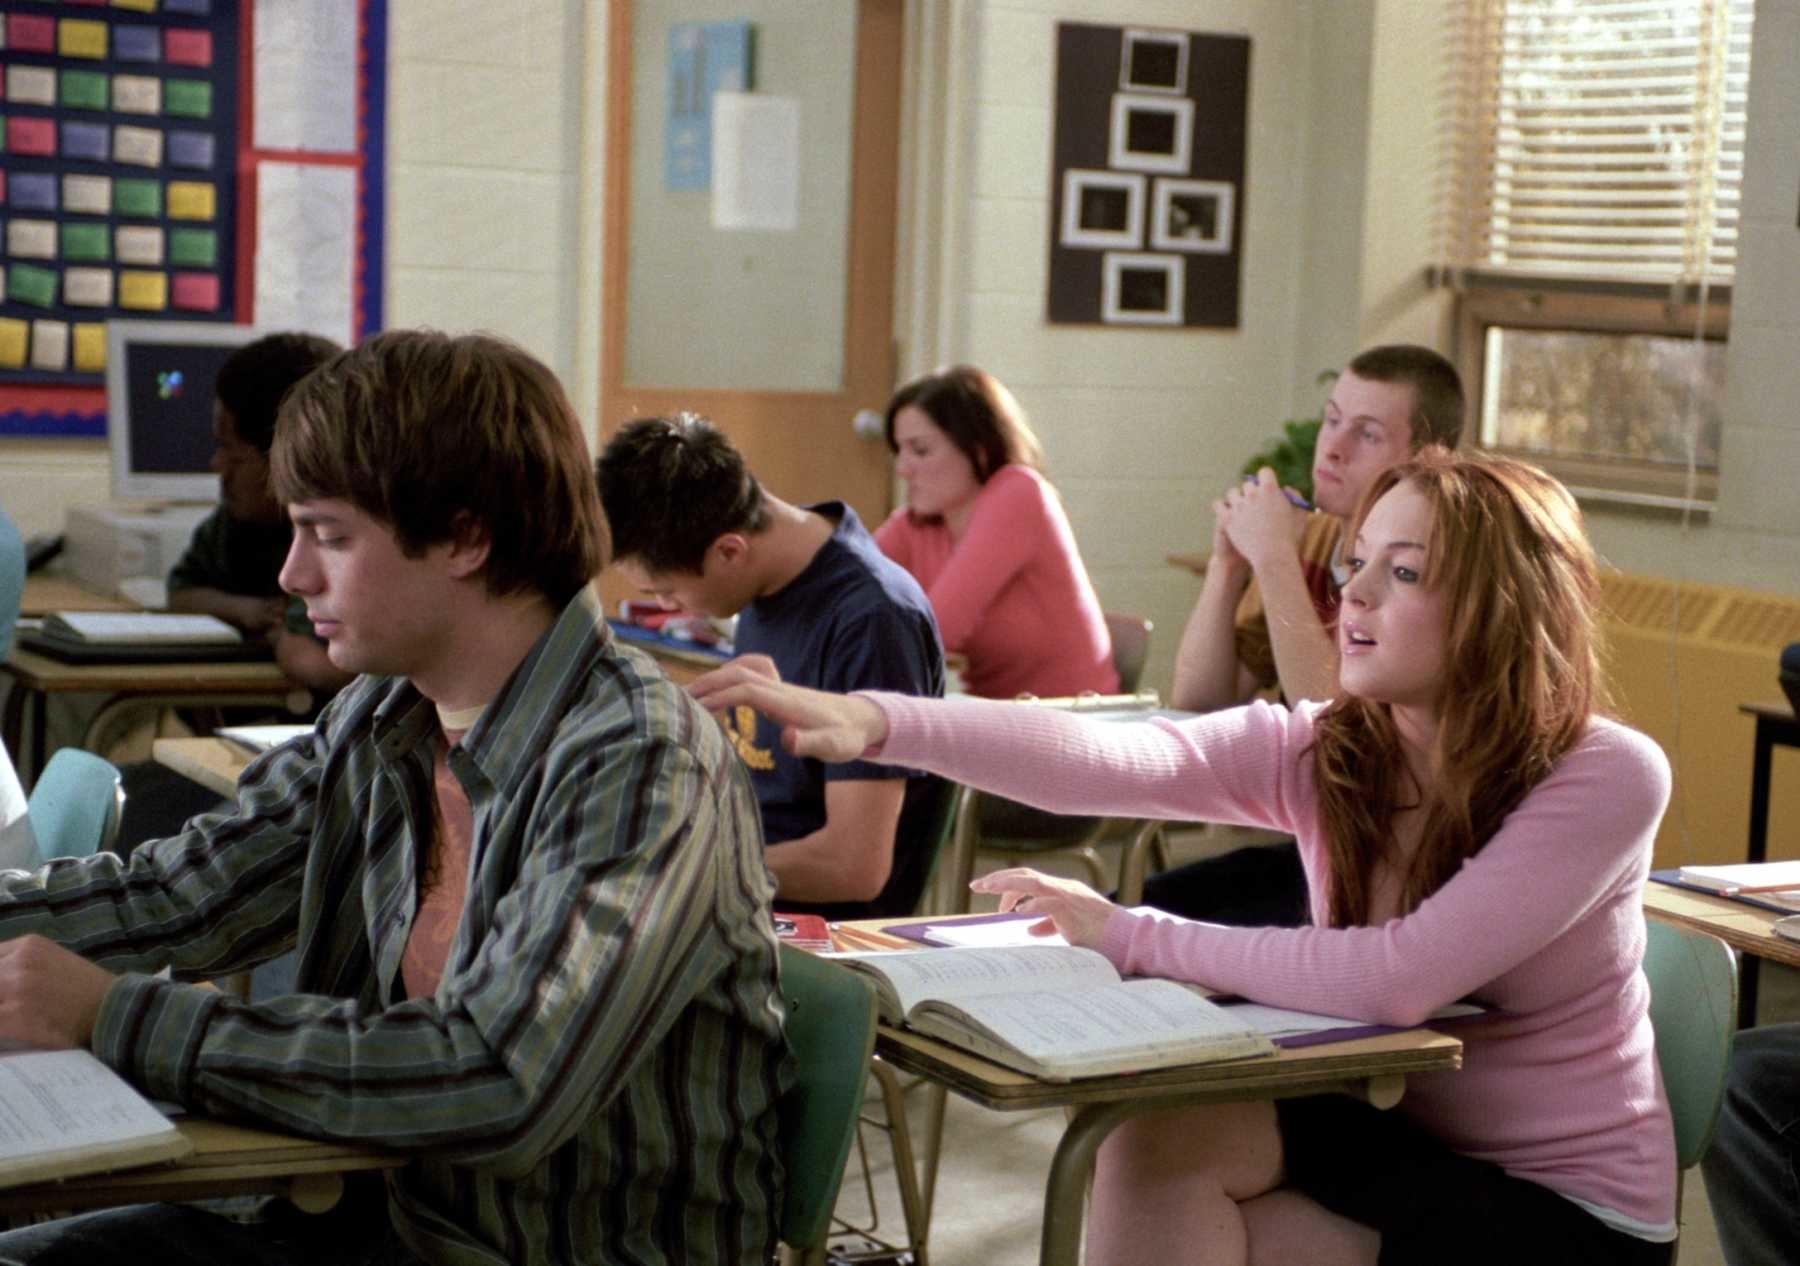 Lindsay Lohan and Jonathan Bennett in a classroom scene from the movie &#x27;Mean Girls&#x27;